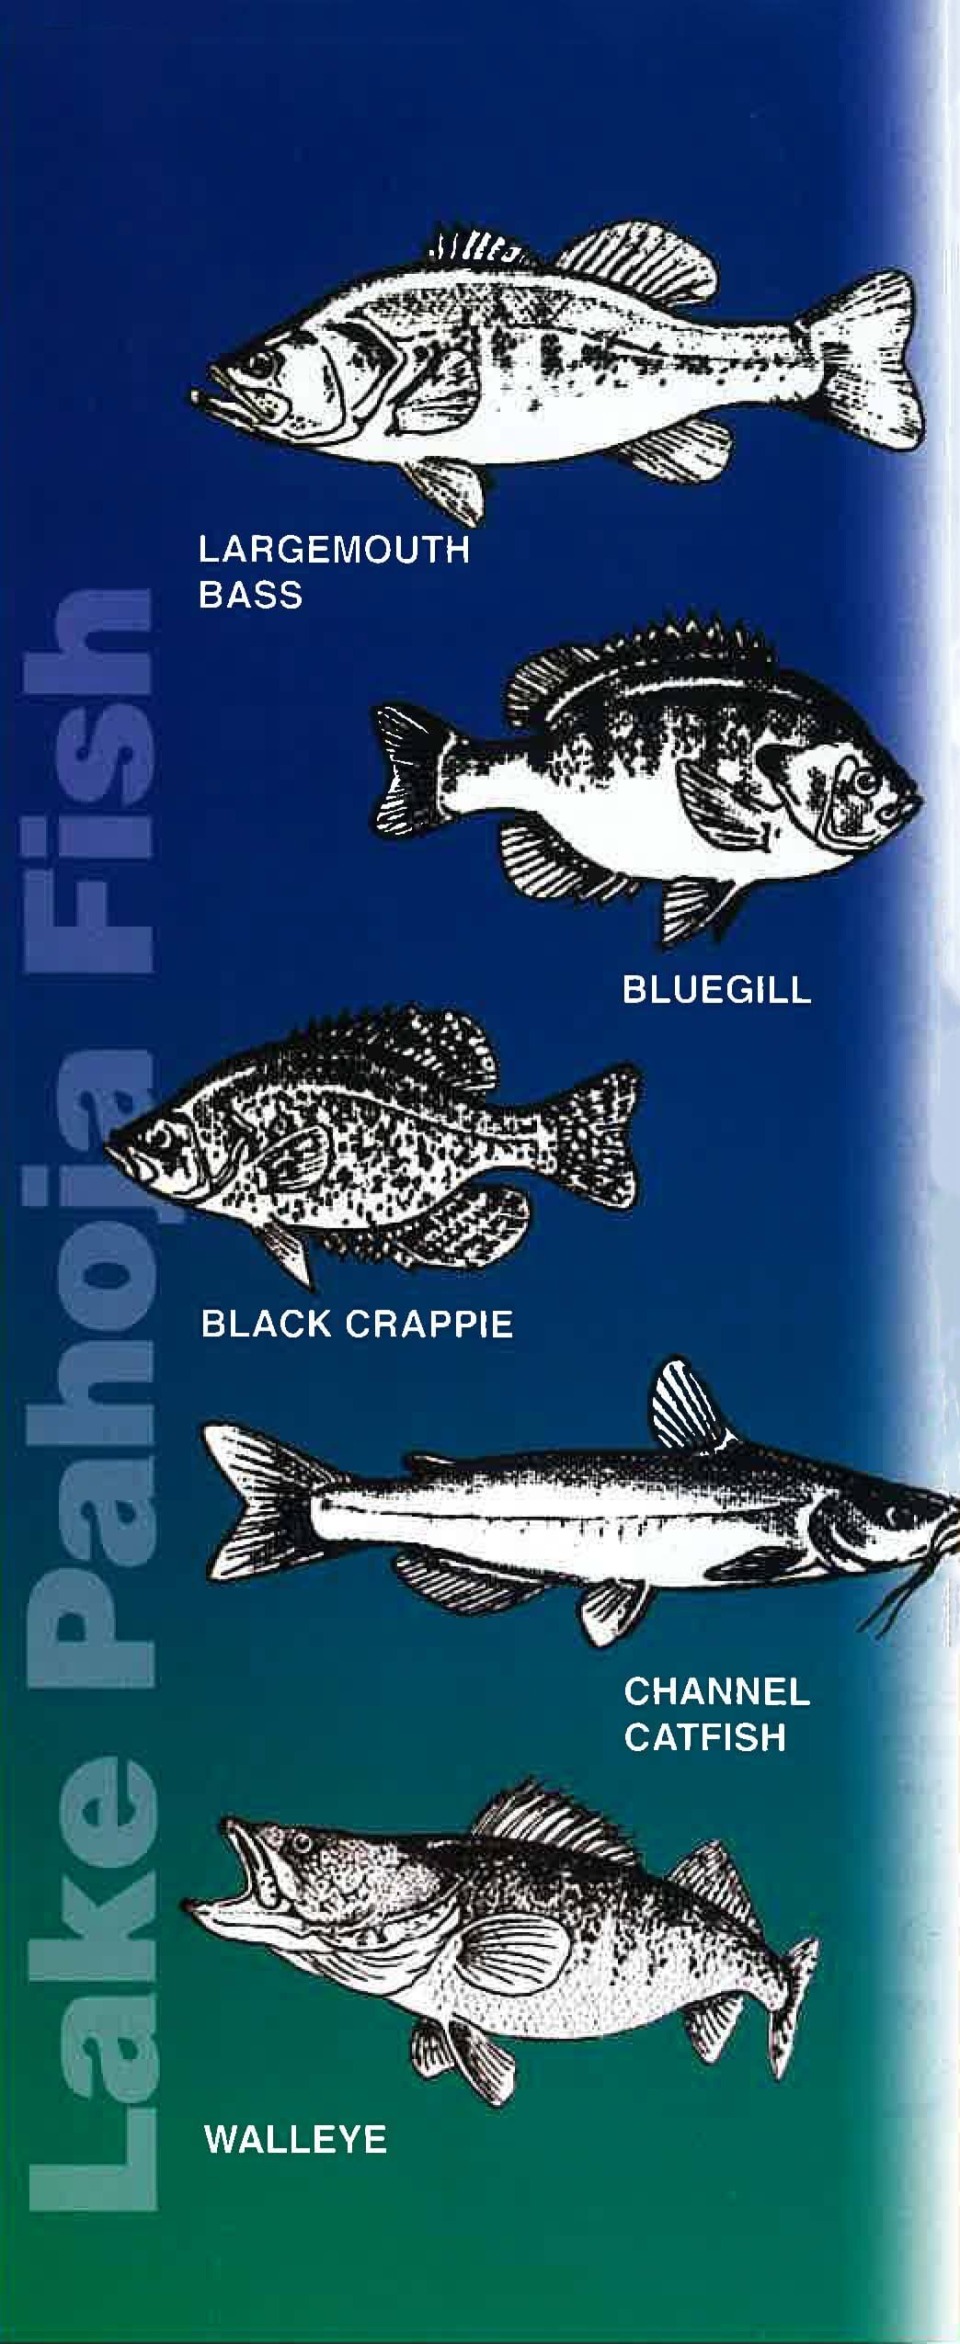 A list of fish in Lake Pahoja: largemouth bass, bluegill, black crappie, yellow perch, channel catfish, black bullhead, and white amur.